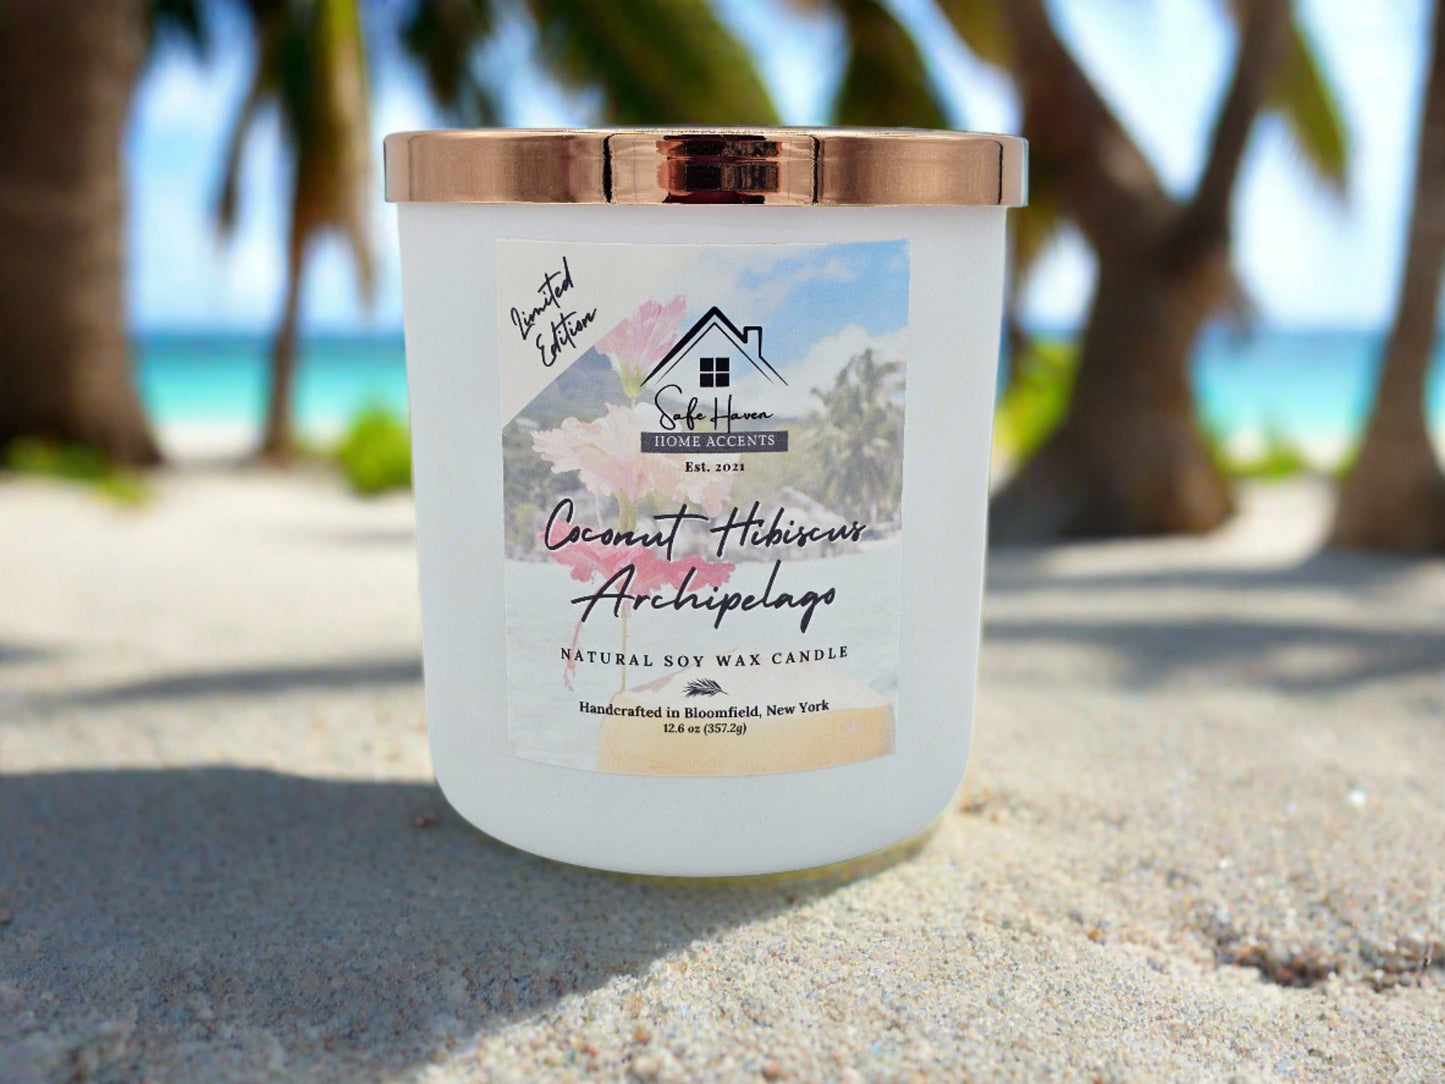 Coconut Hibiscus Archipelago Natural Soy Wax Candle